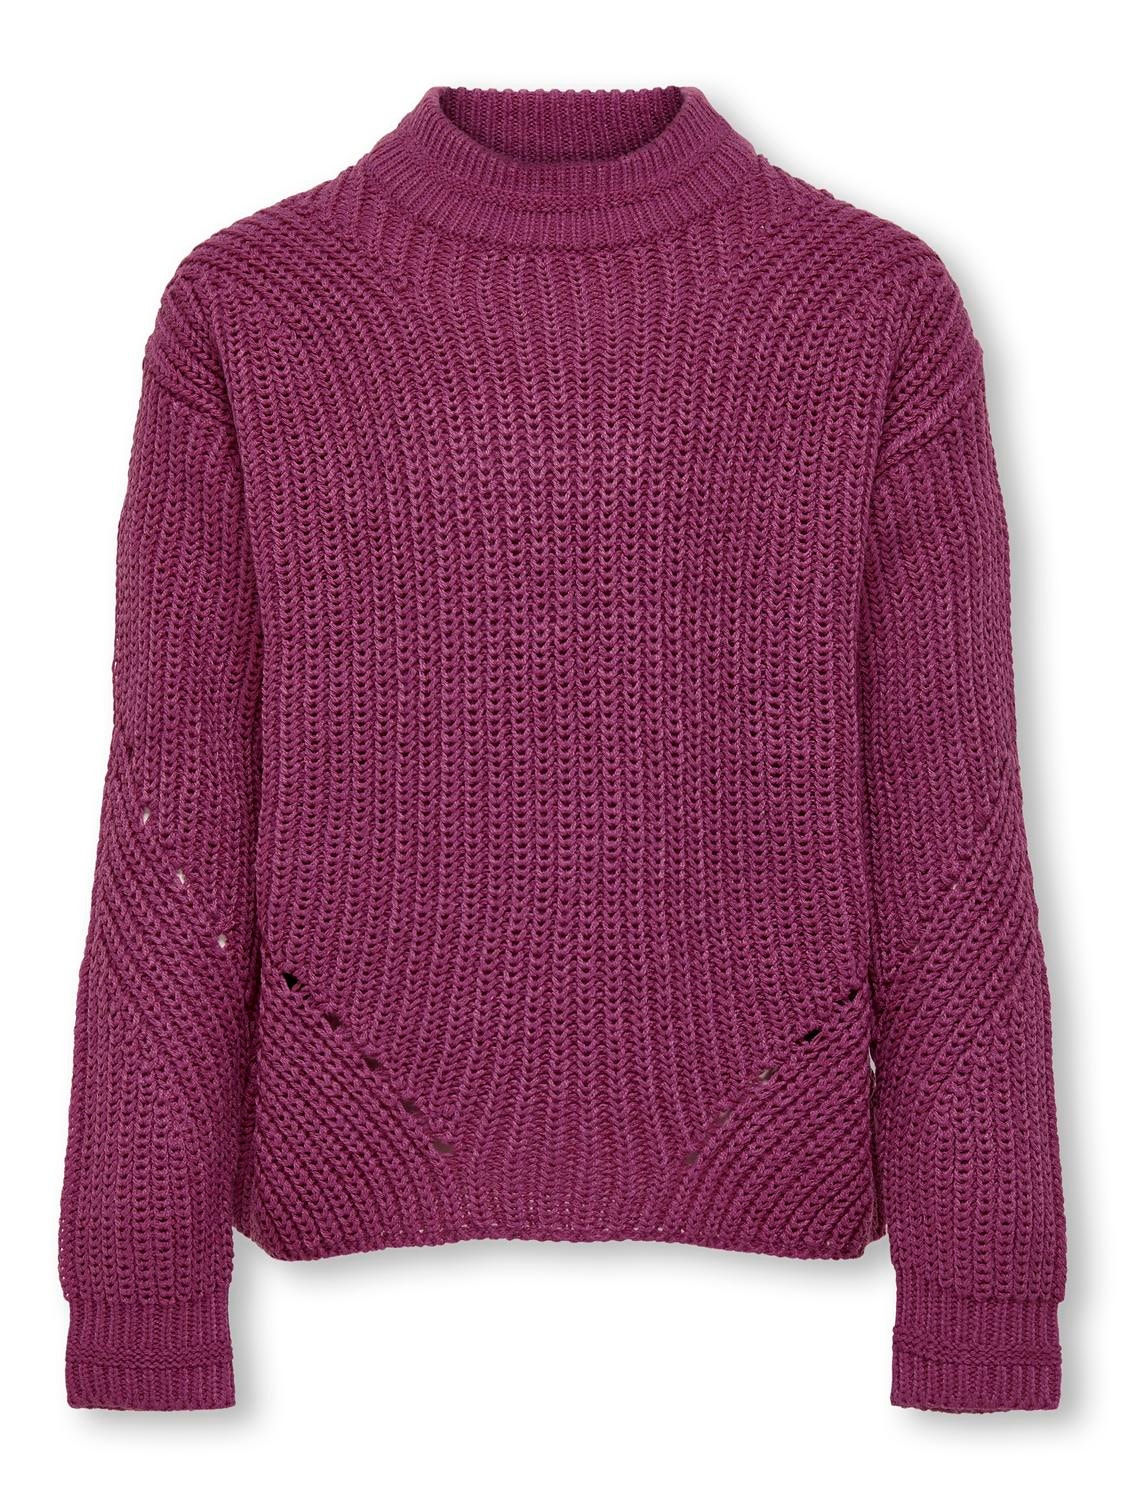 ONLY o-neck knit pullover -Red Violet - 15306455